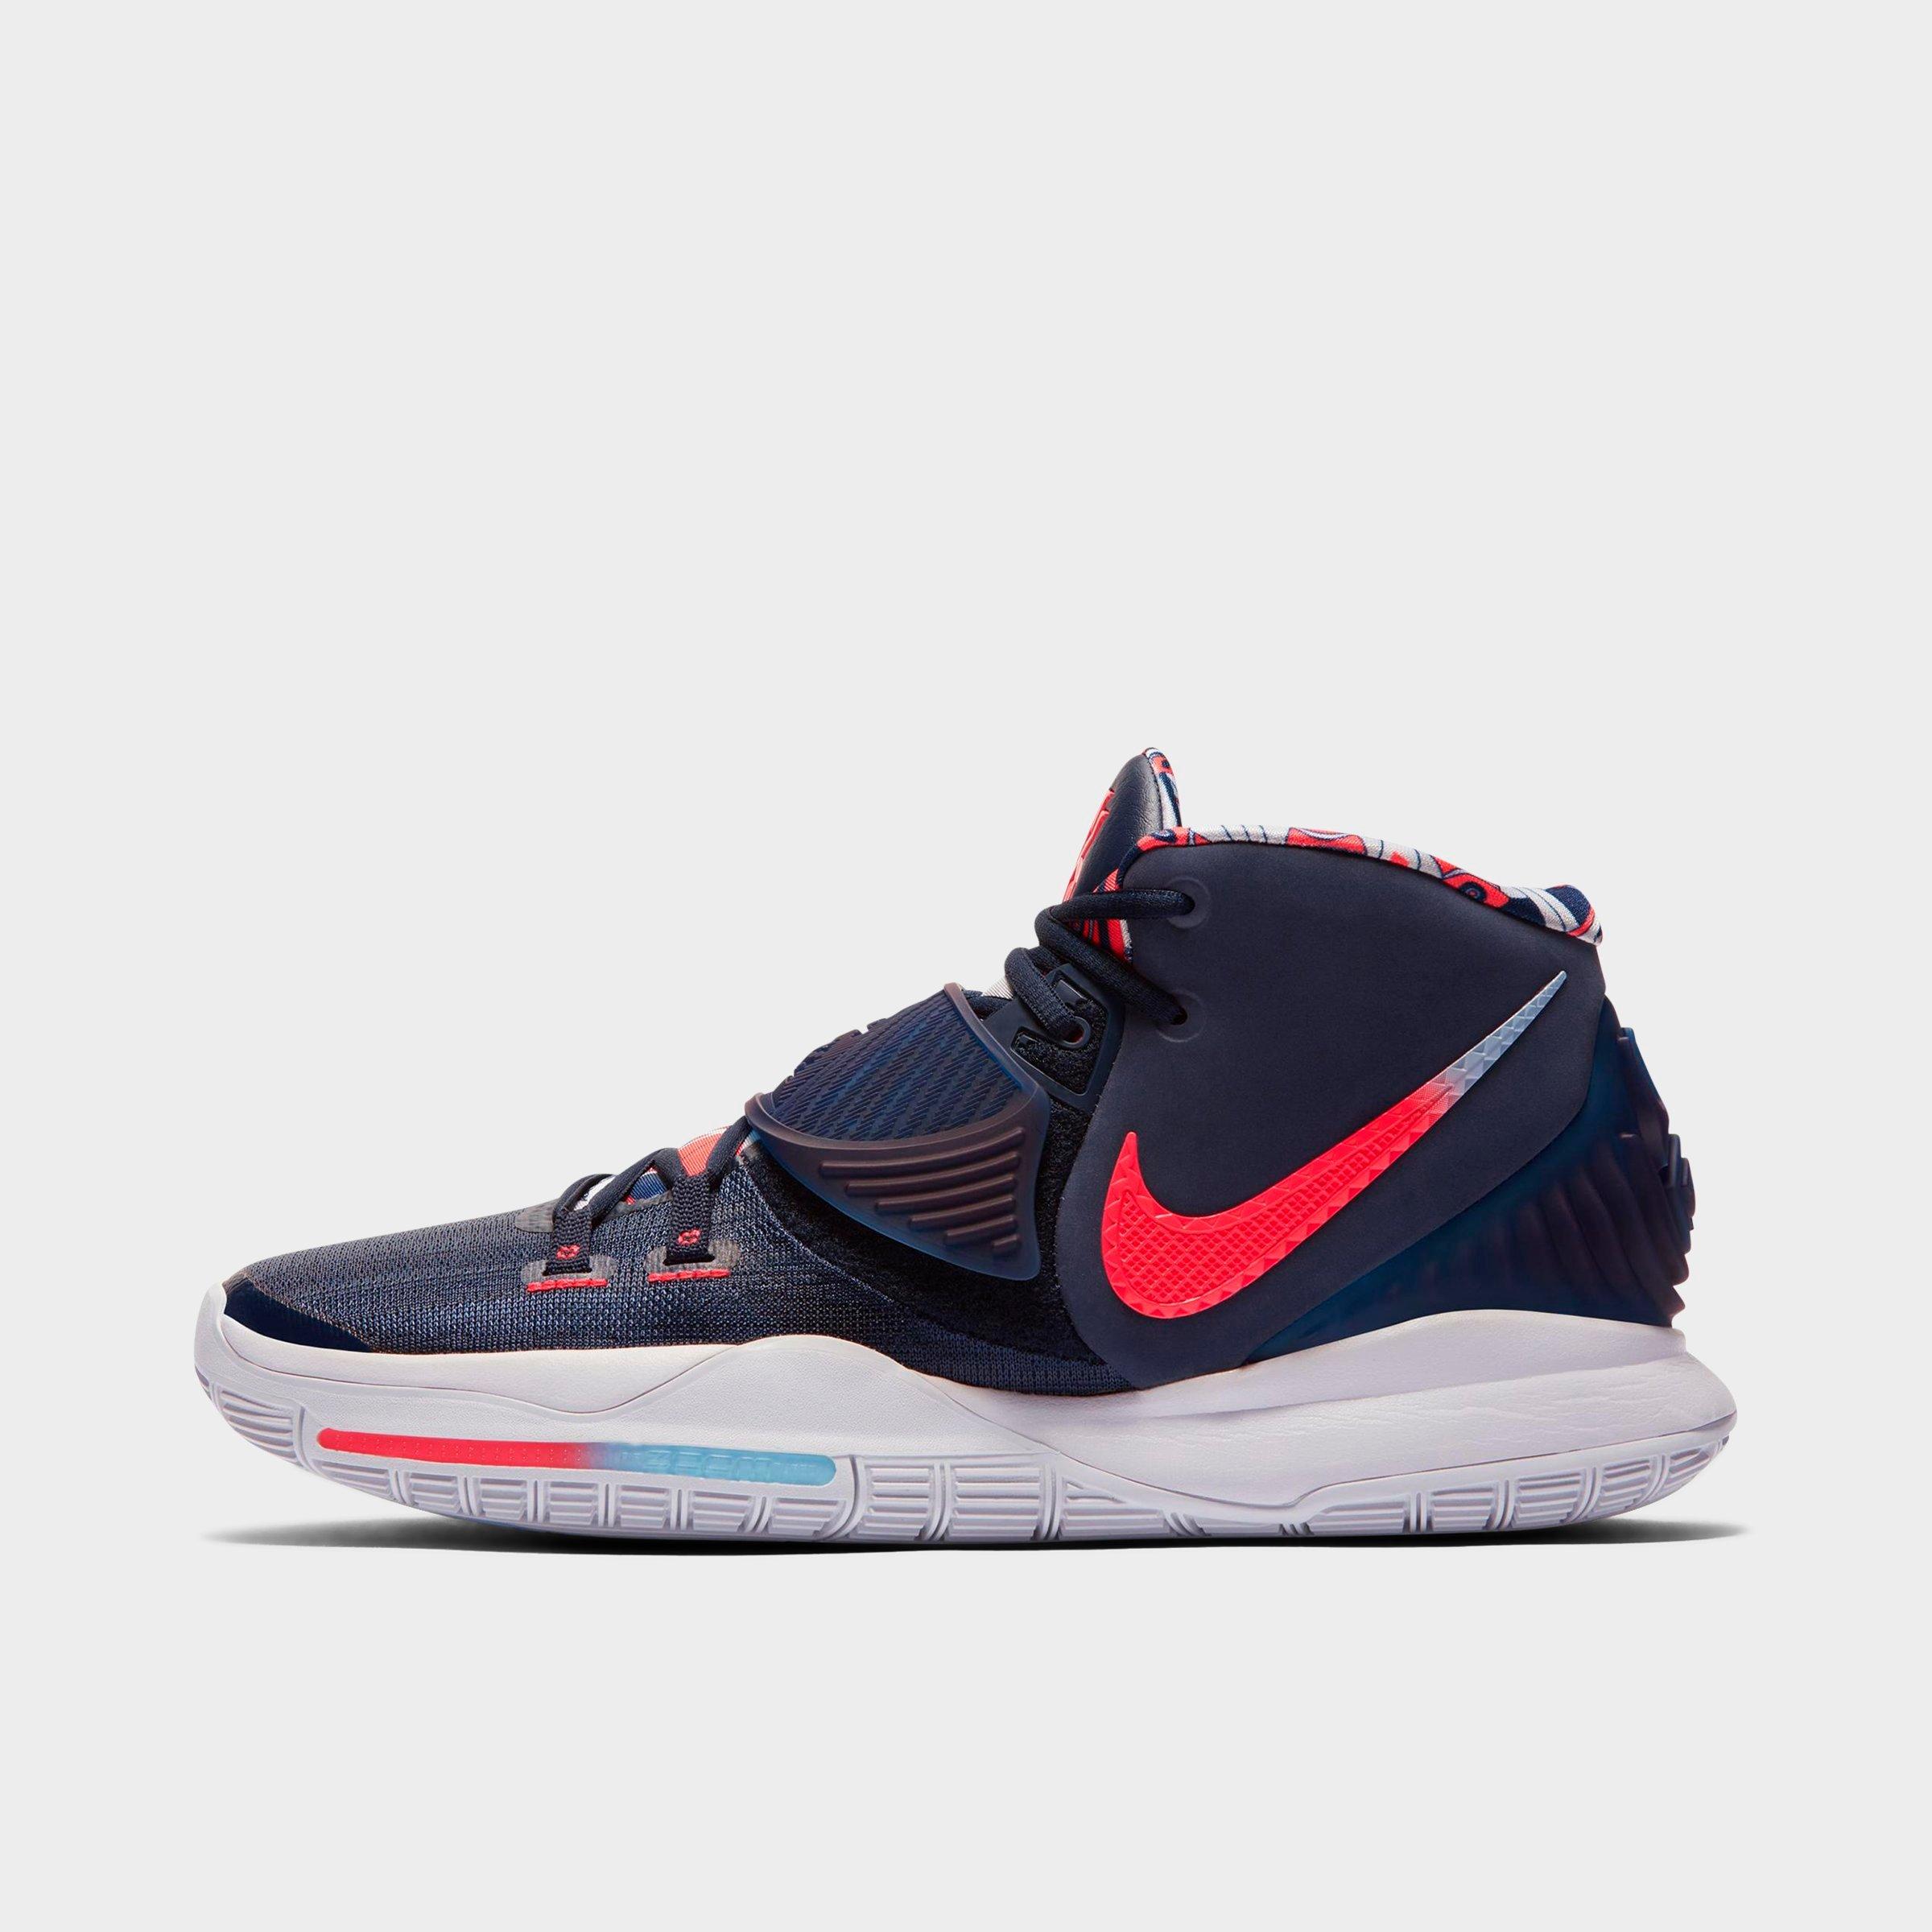 kyrie irving shoes size 7.5